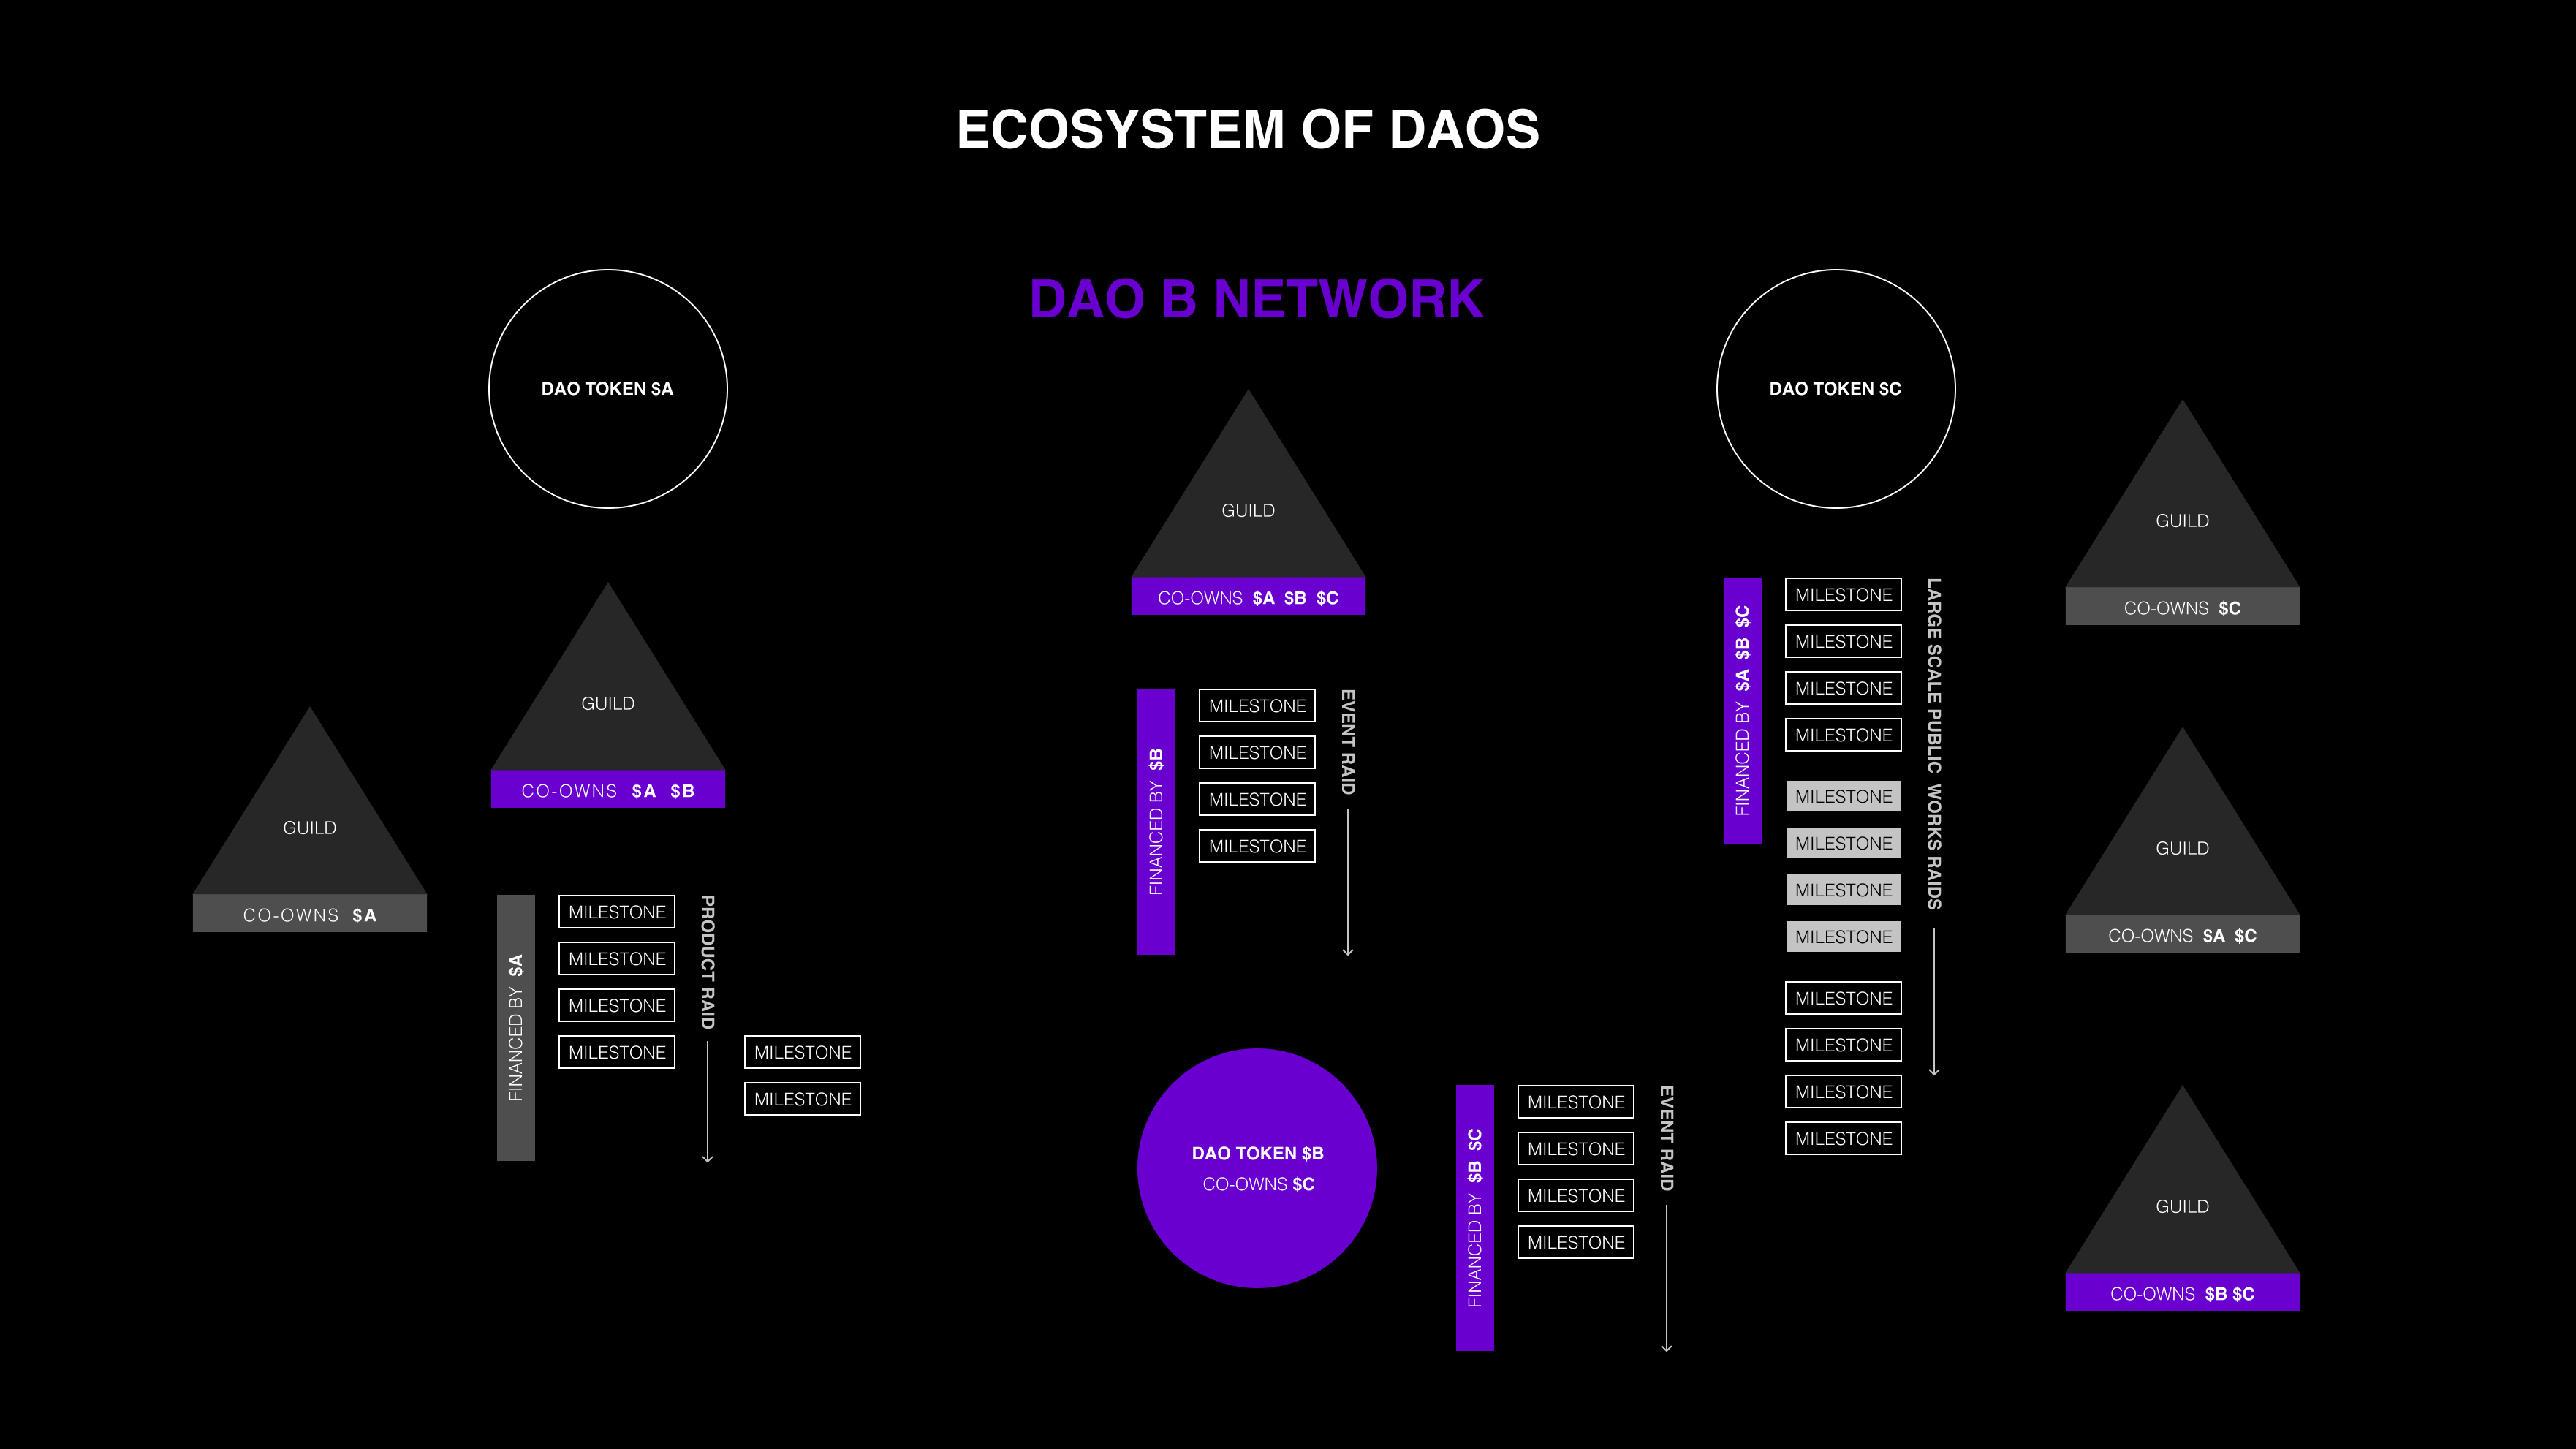 An example of DAOs in which tokens, teams, and missions are distributed across several DAO networks, which can be ranked or assorted in multiple ways.